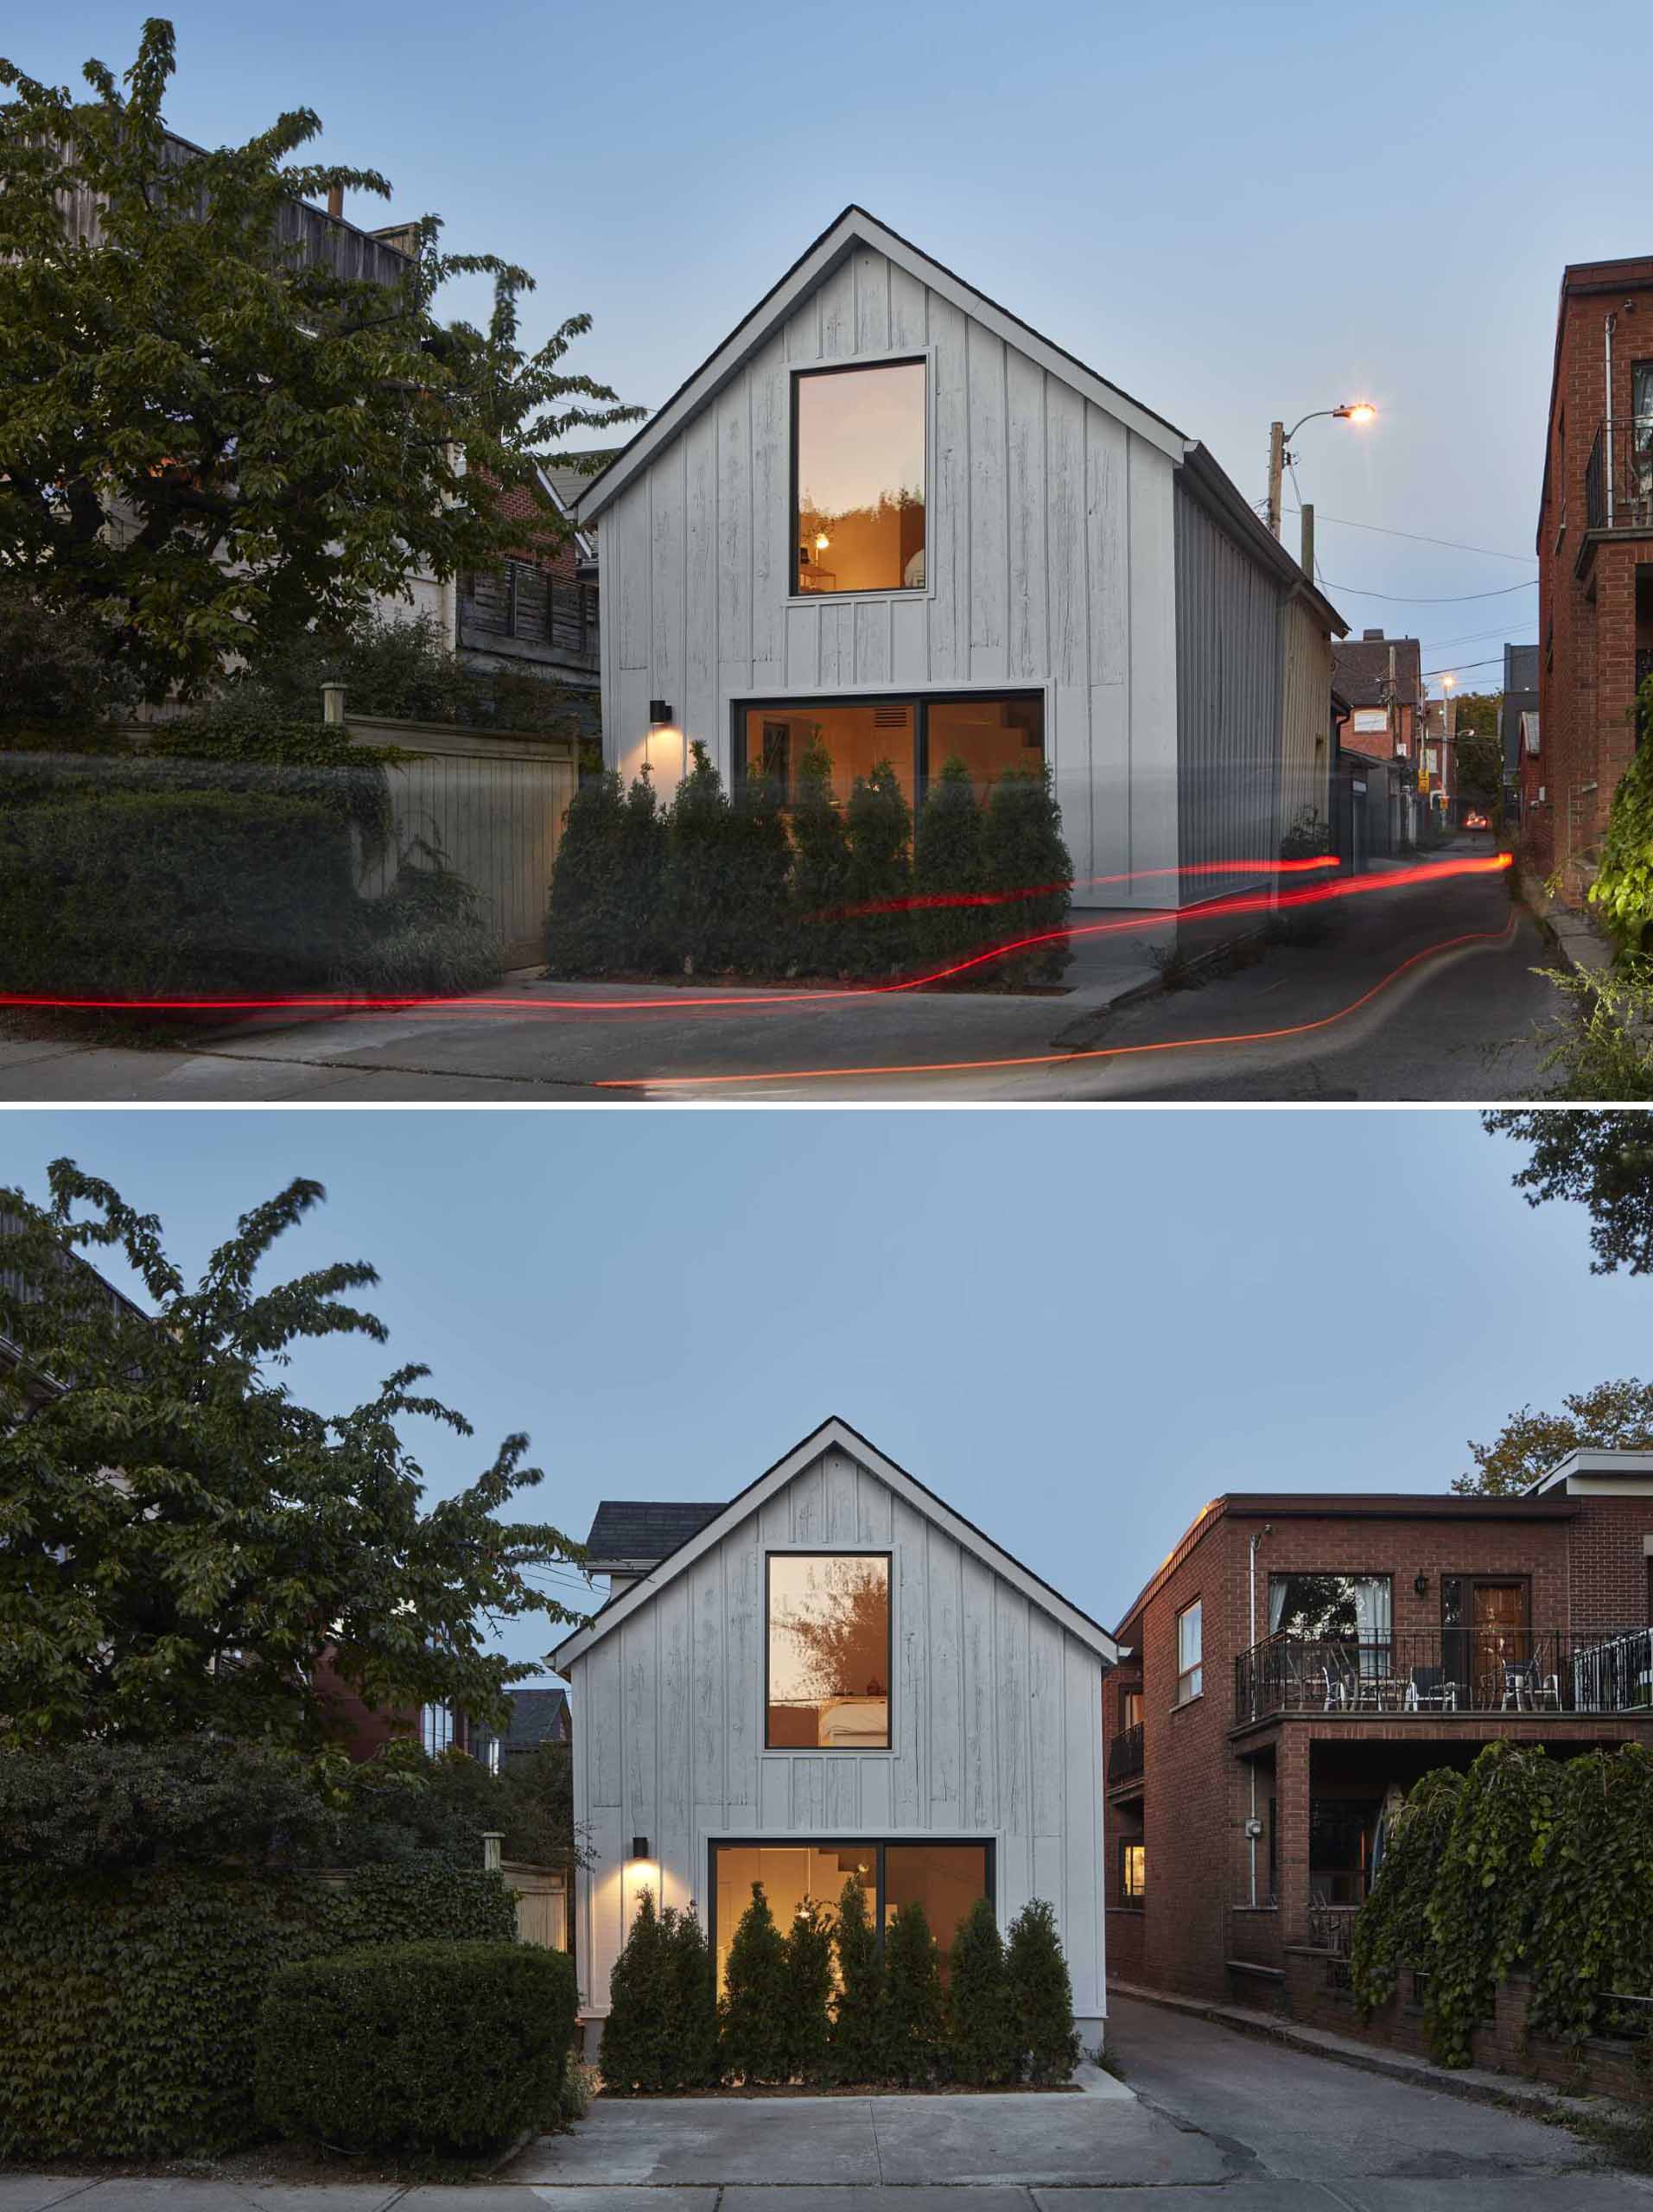 A garage has been converted into a small laneway house.